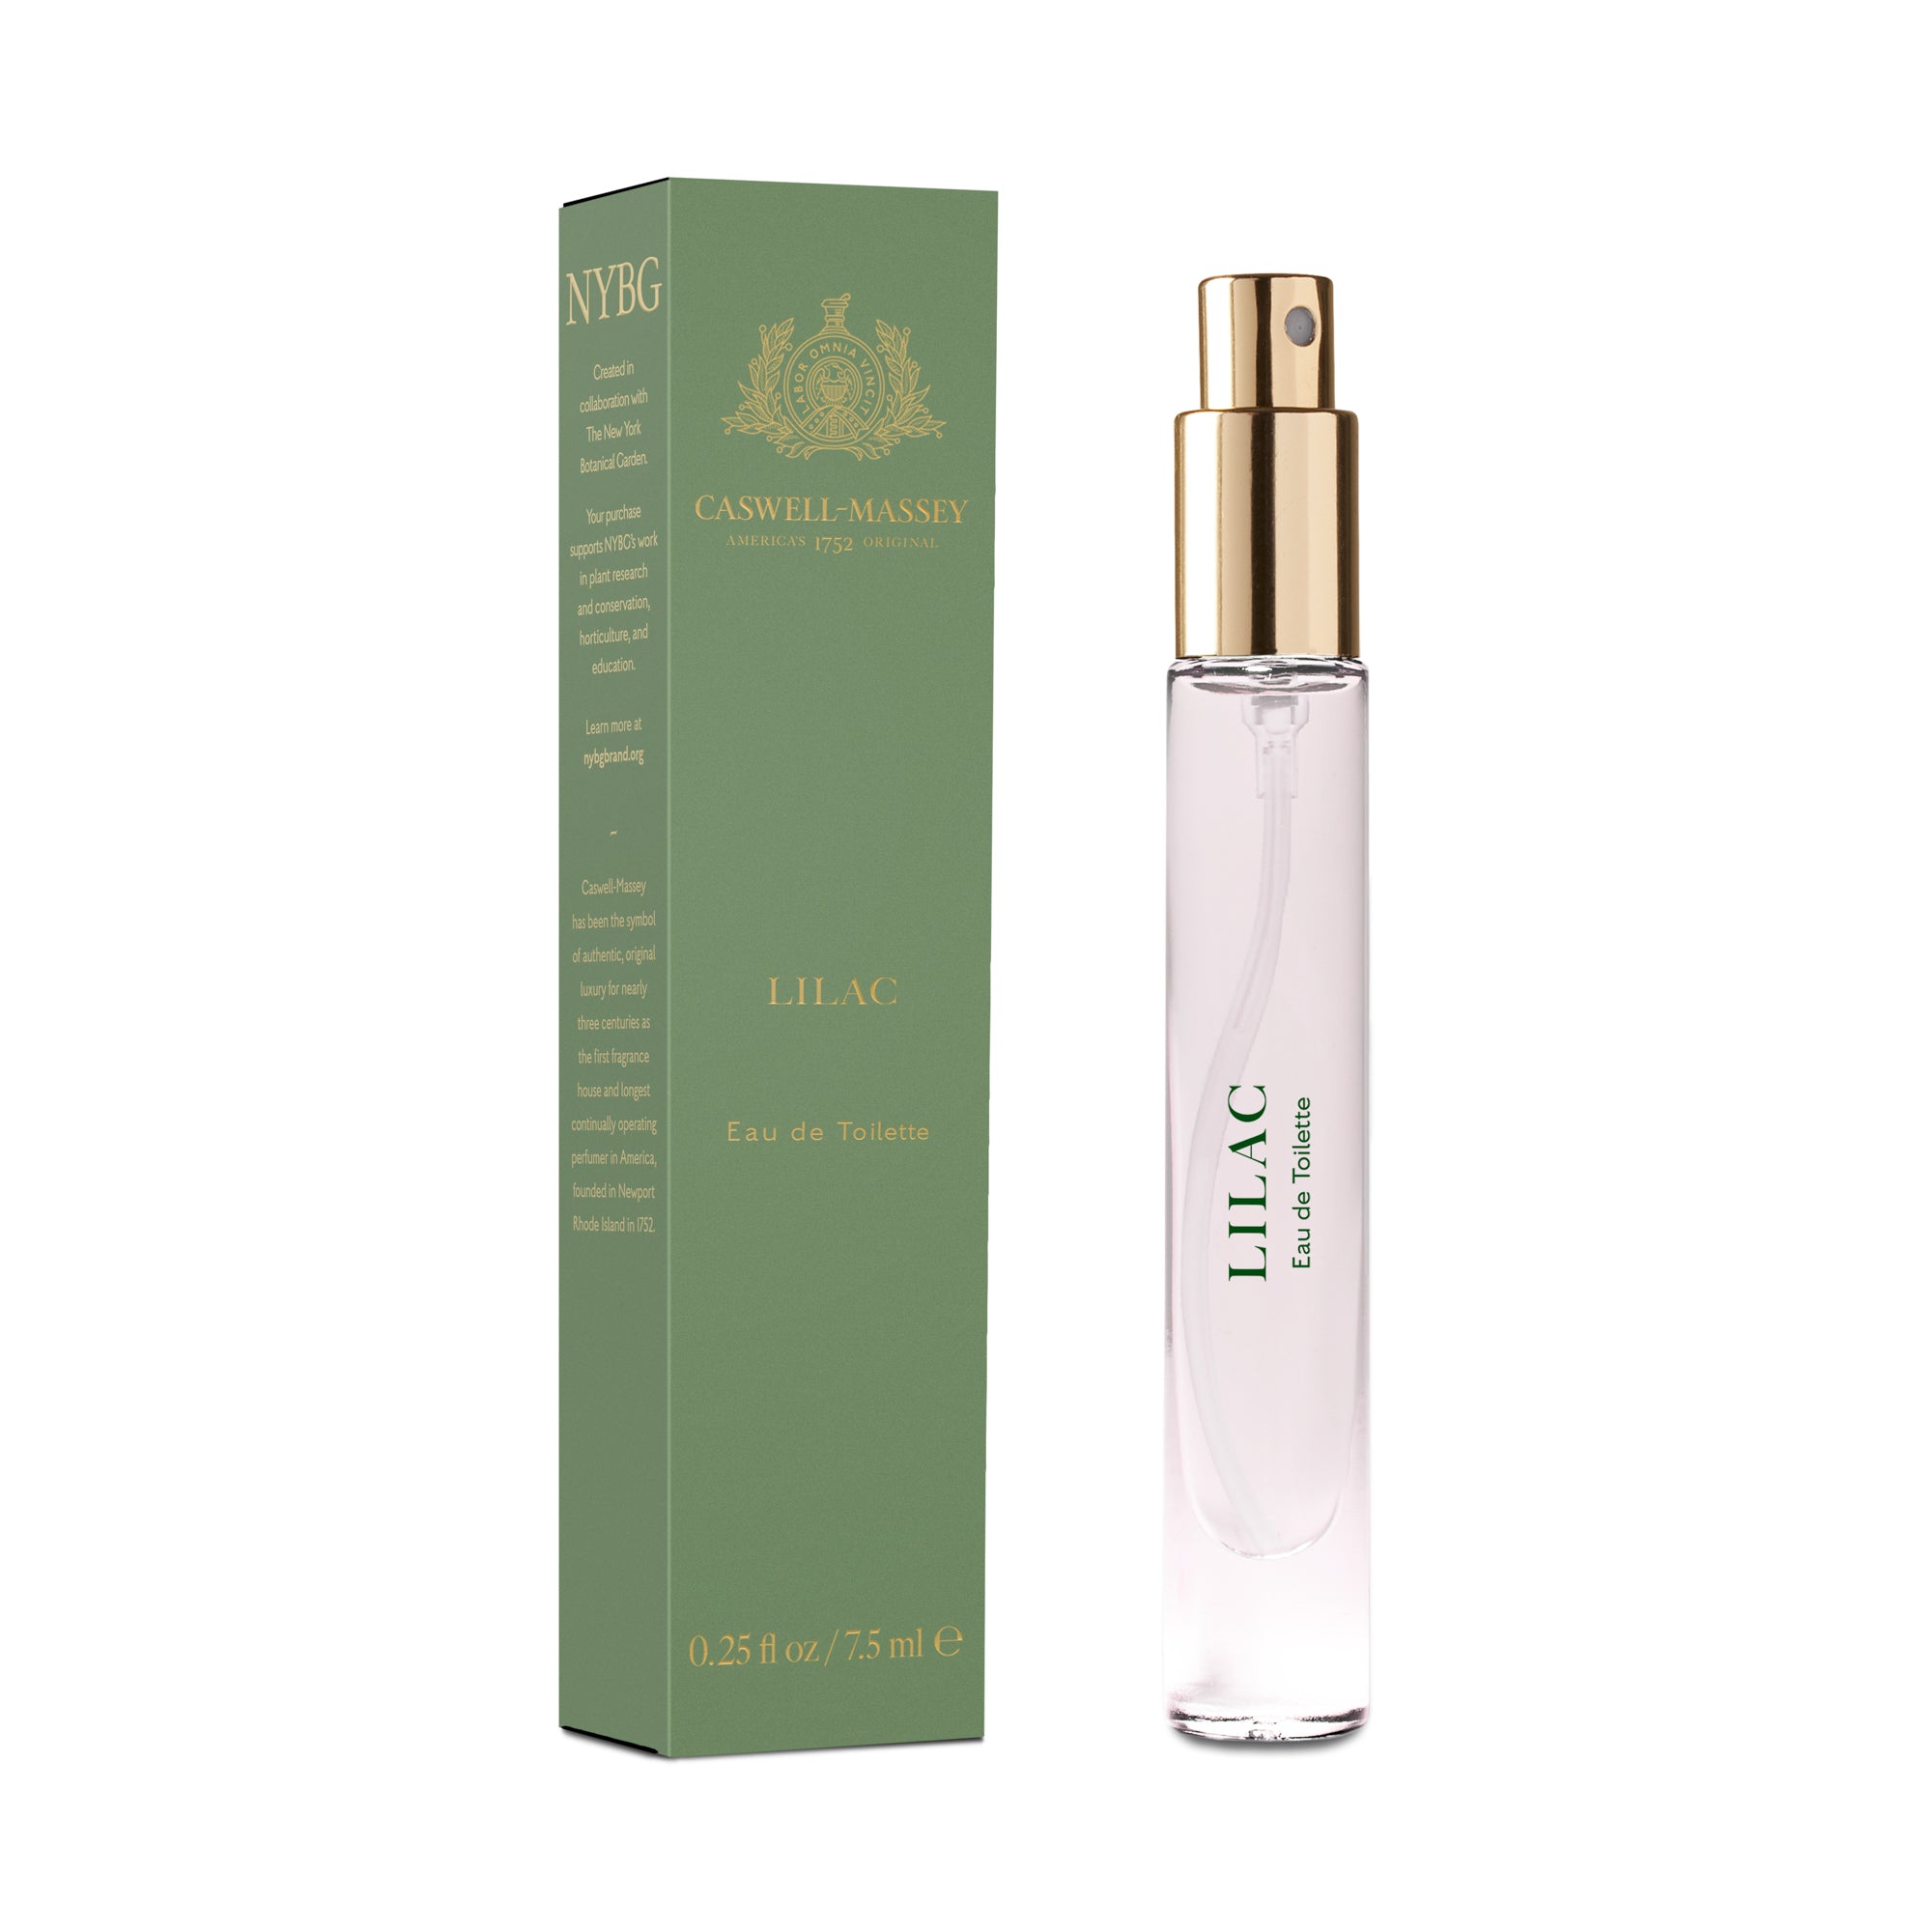 Lilac Eau de Toilette, Fine Fragrance by Caswell-Massey, 7.5mL Discovery Size, shown with pale green box